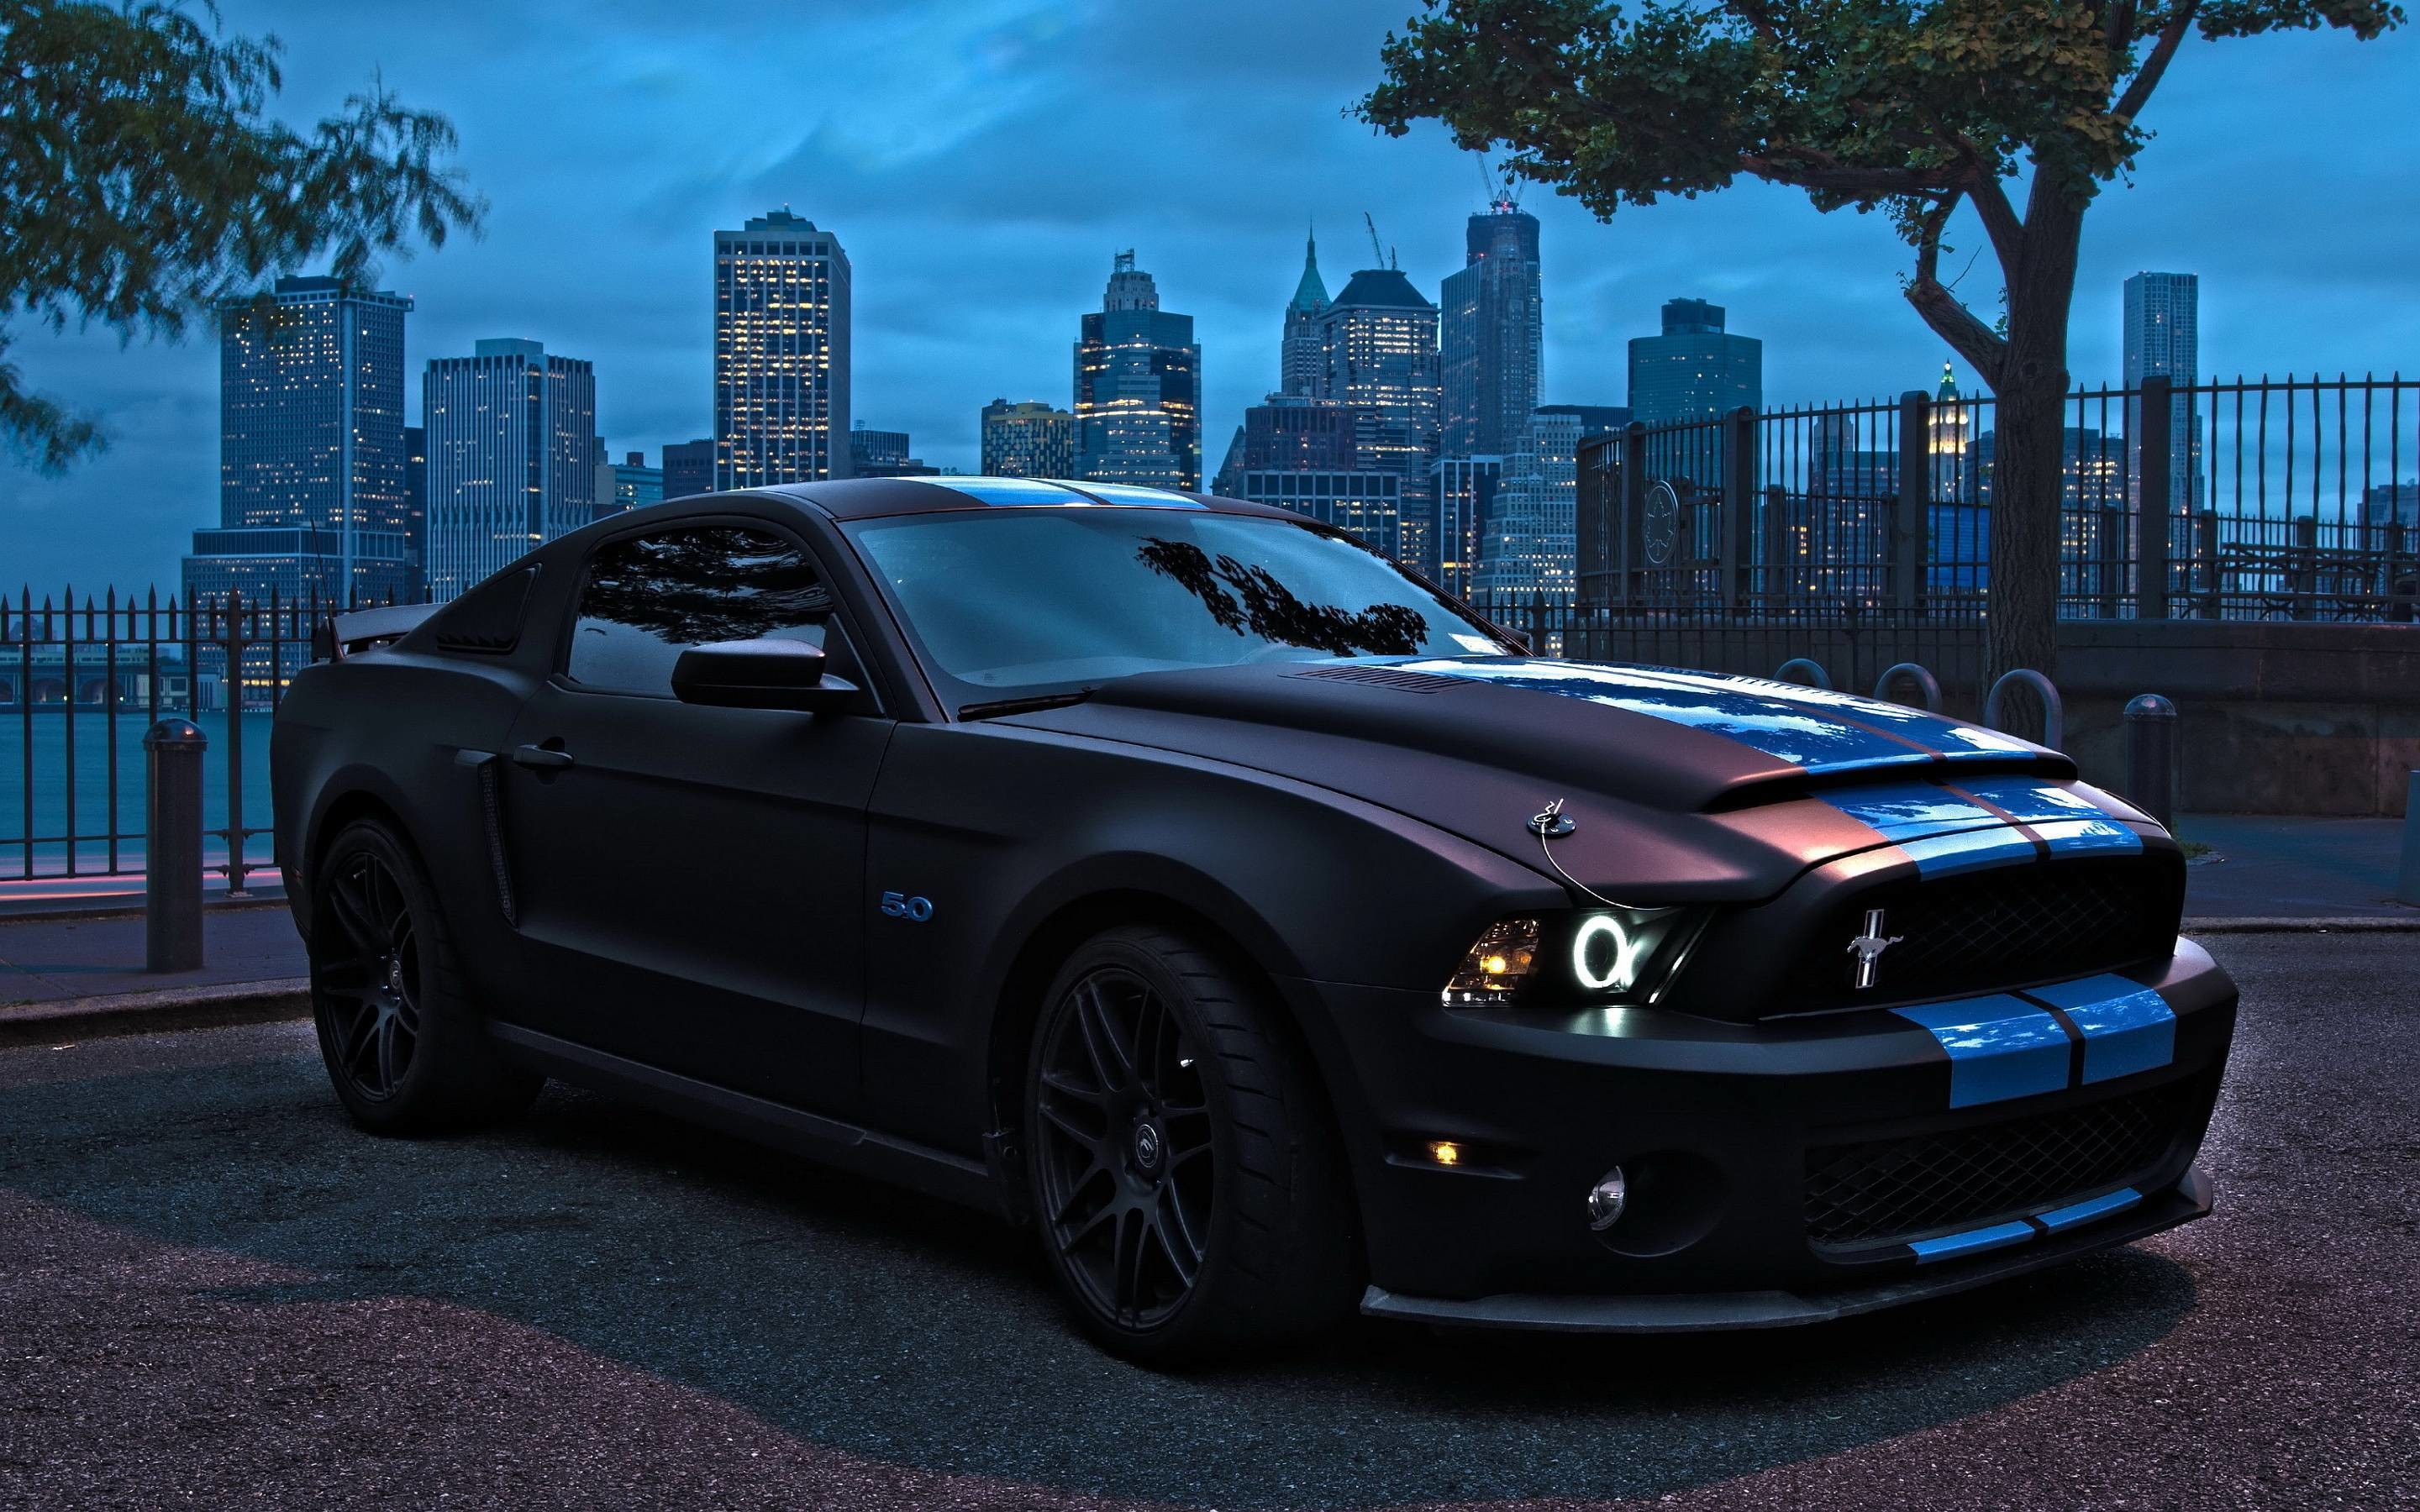 2880x1800 Ford Mustang Gt Wallpapers Wallpaper HÃ¶hle Auto